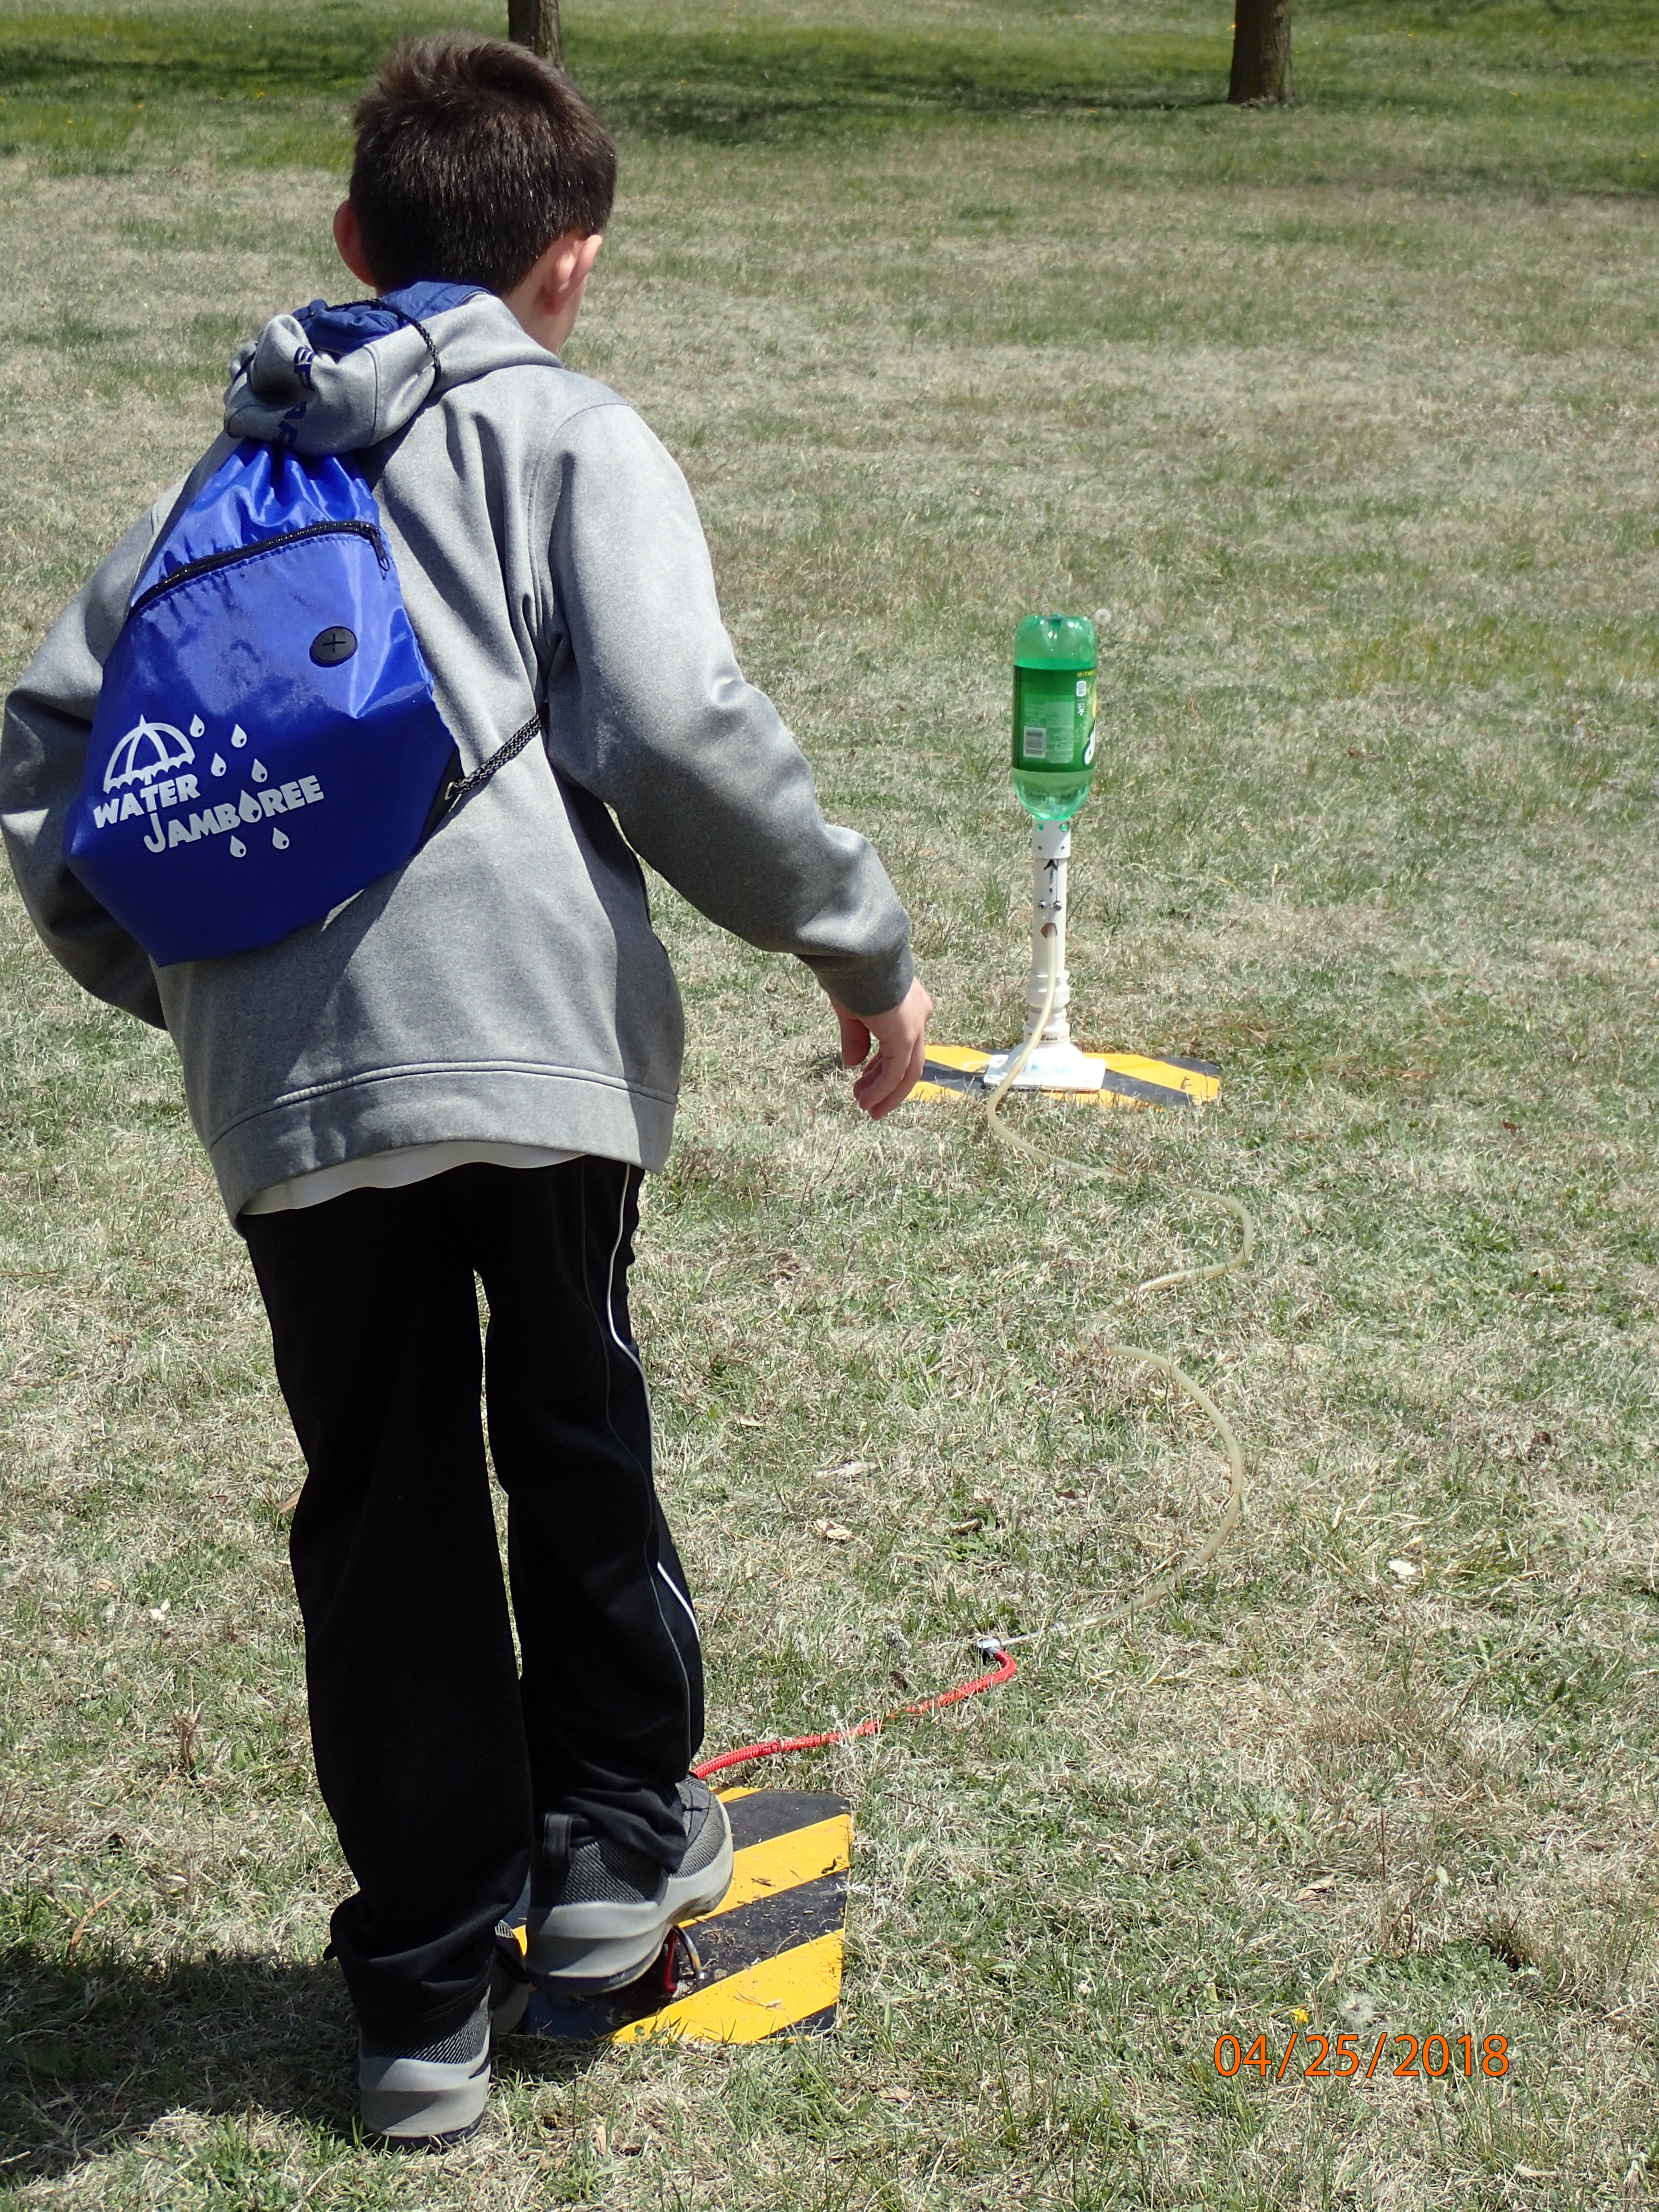 Student shooting off a water rocket